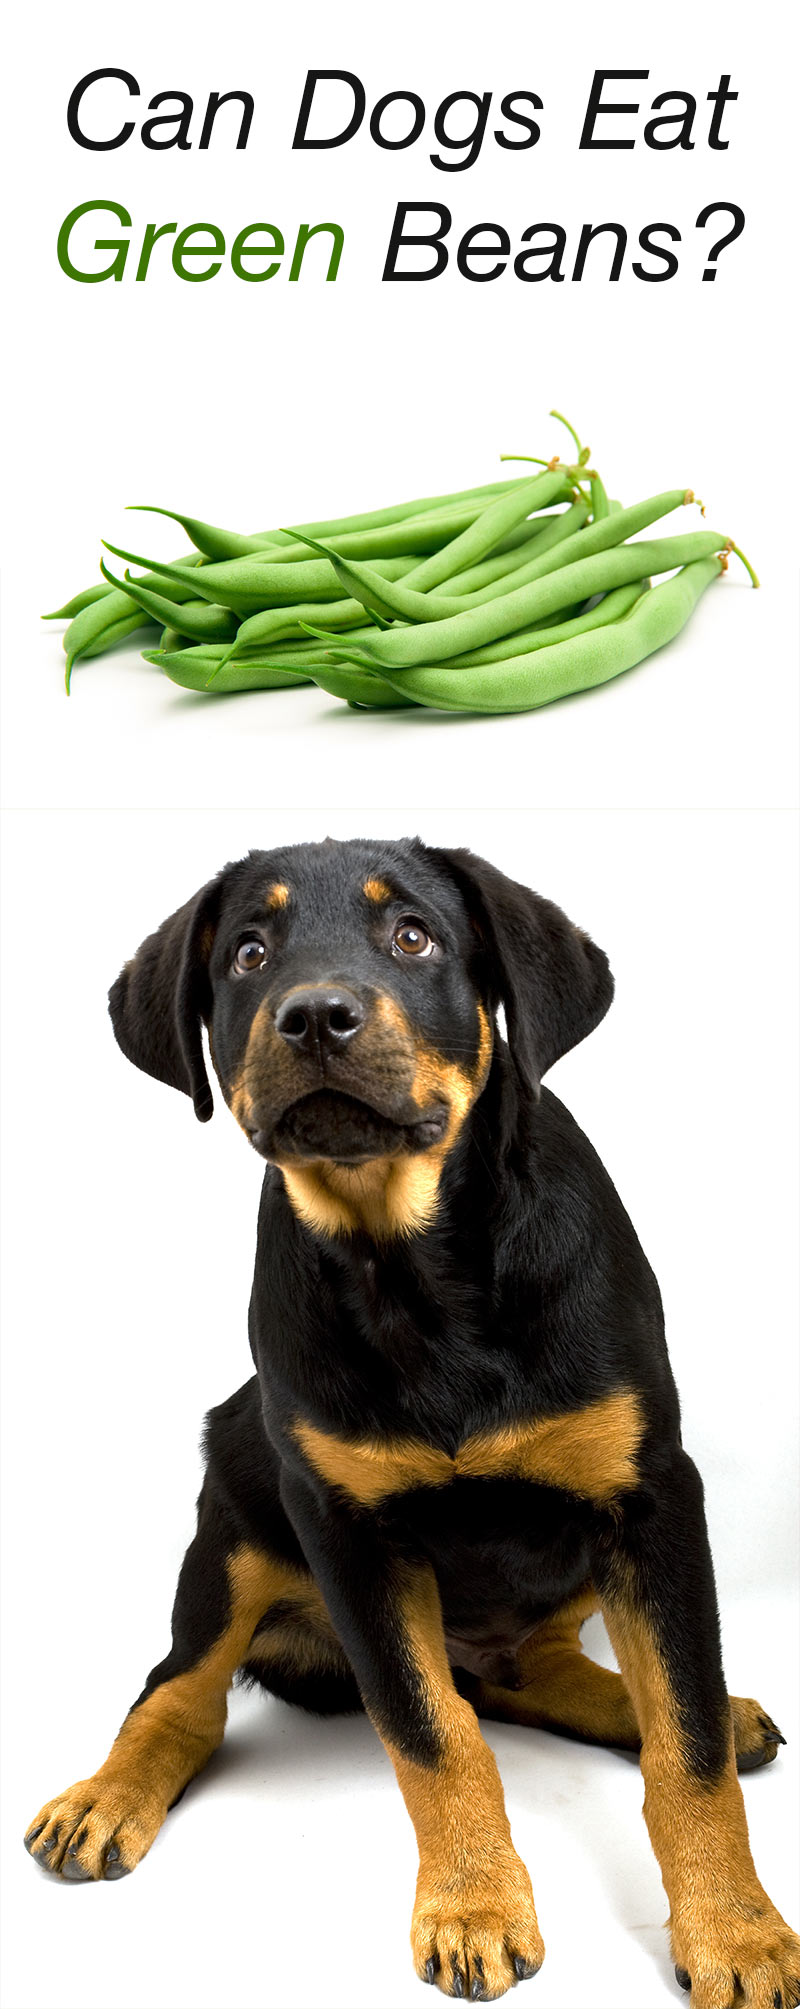 can dogs eat green beans?